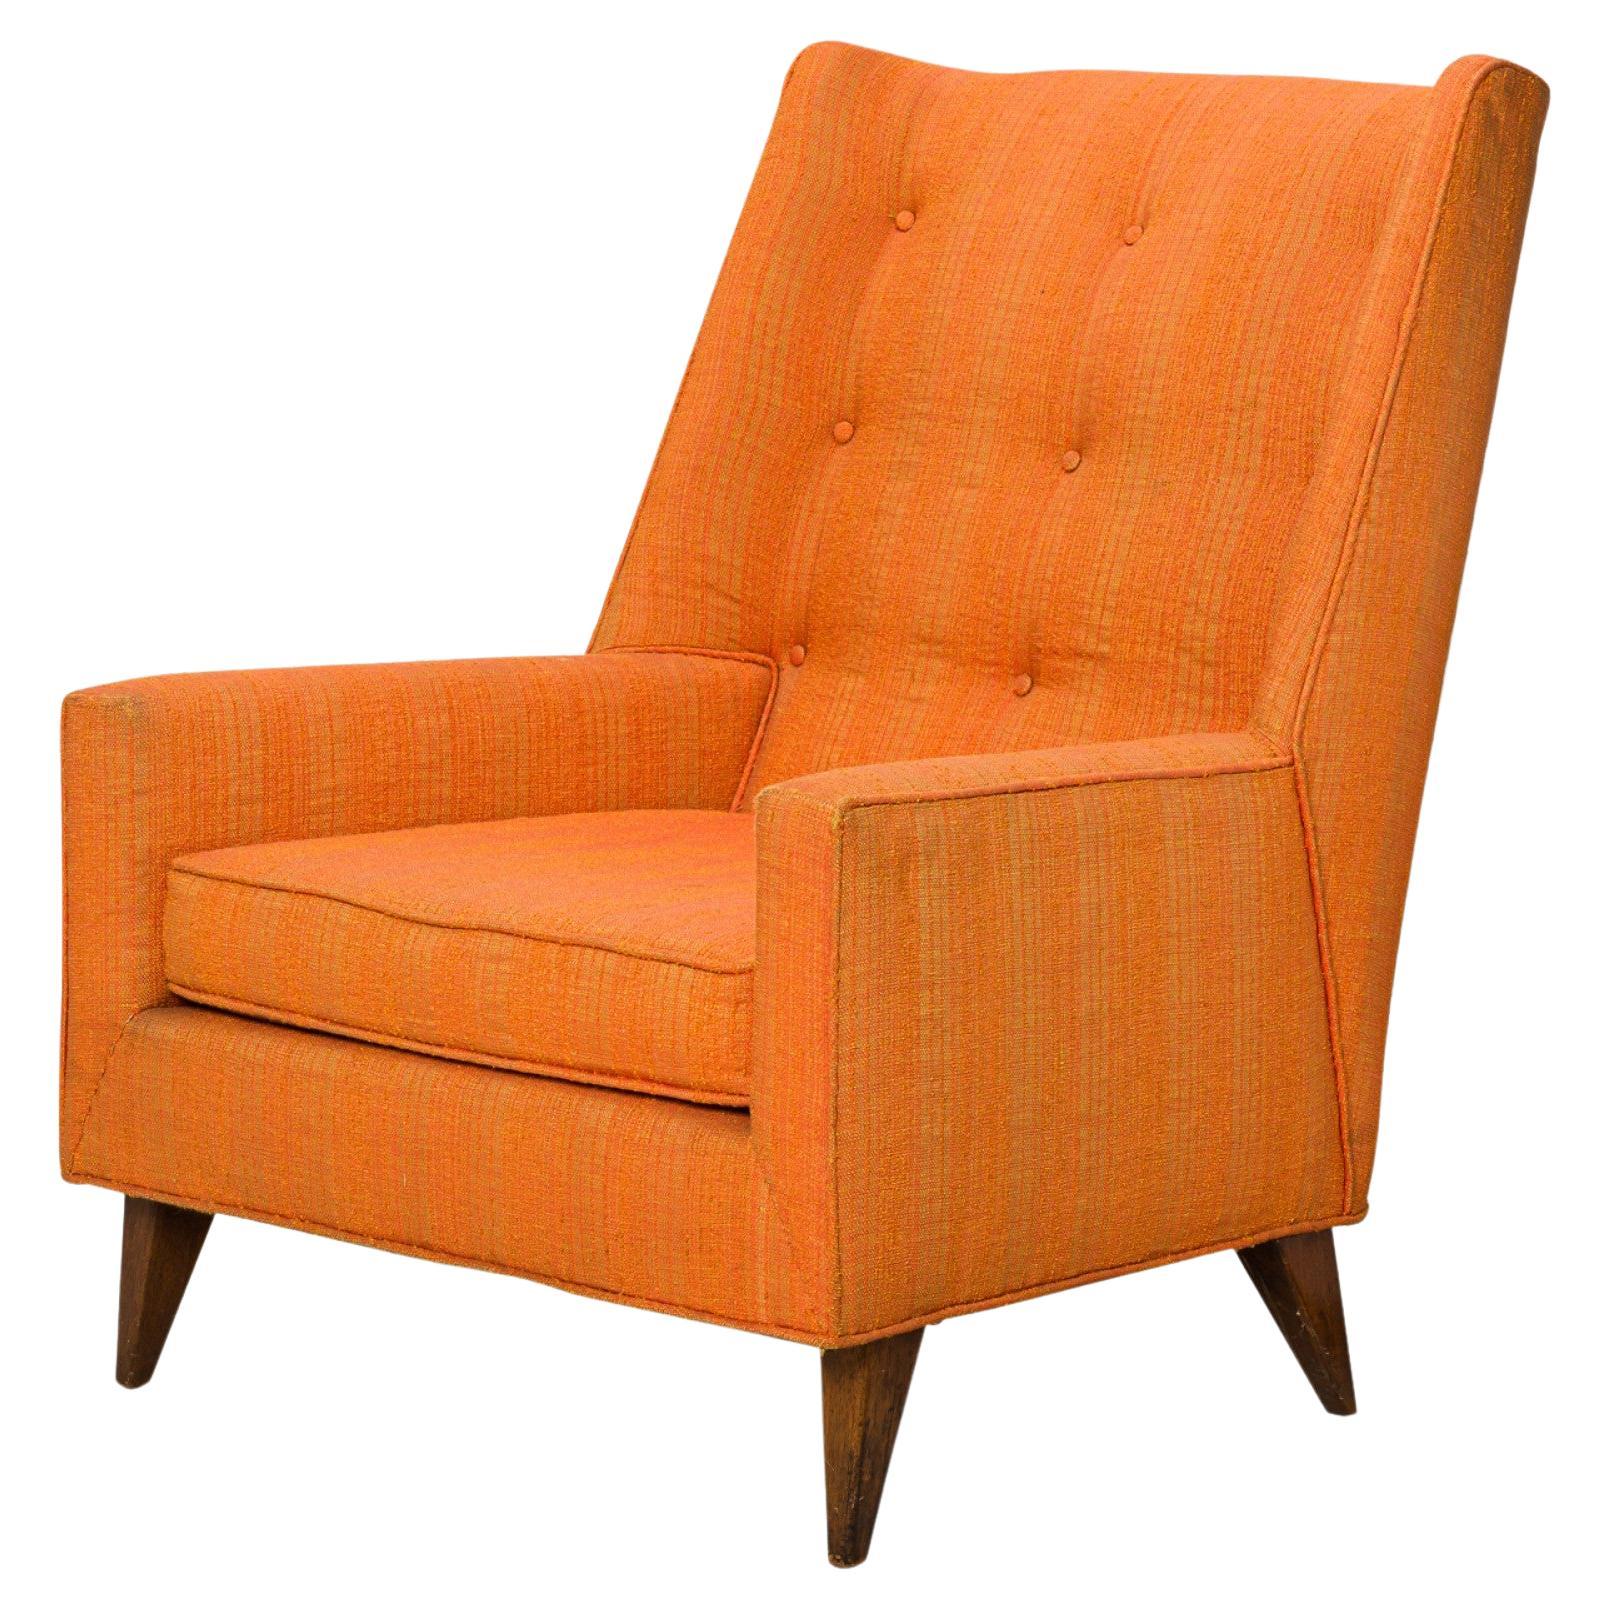 Harvey Probber Tall Back Orange Fabric Upholstered Arm / Lounge Chair